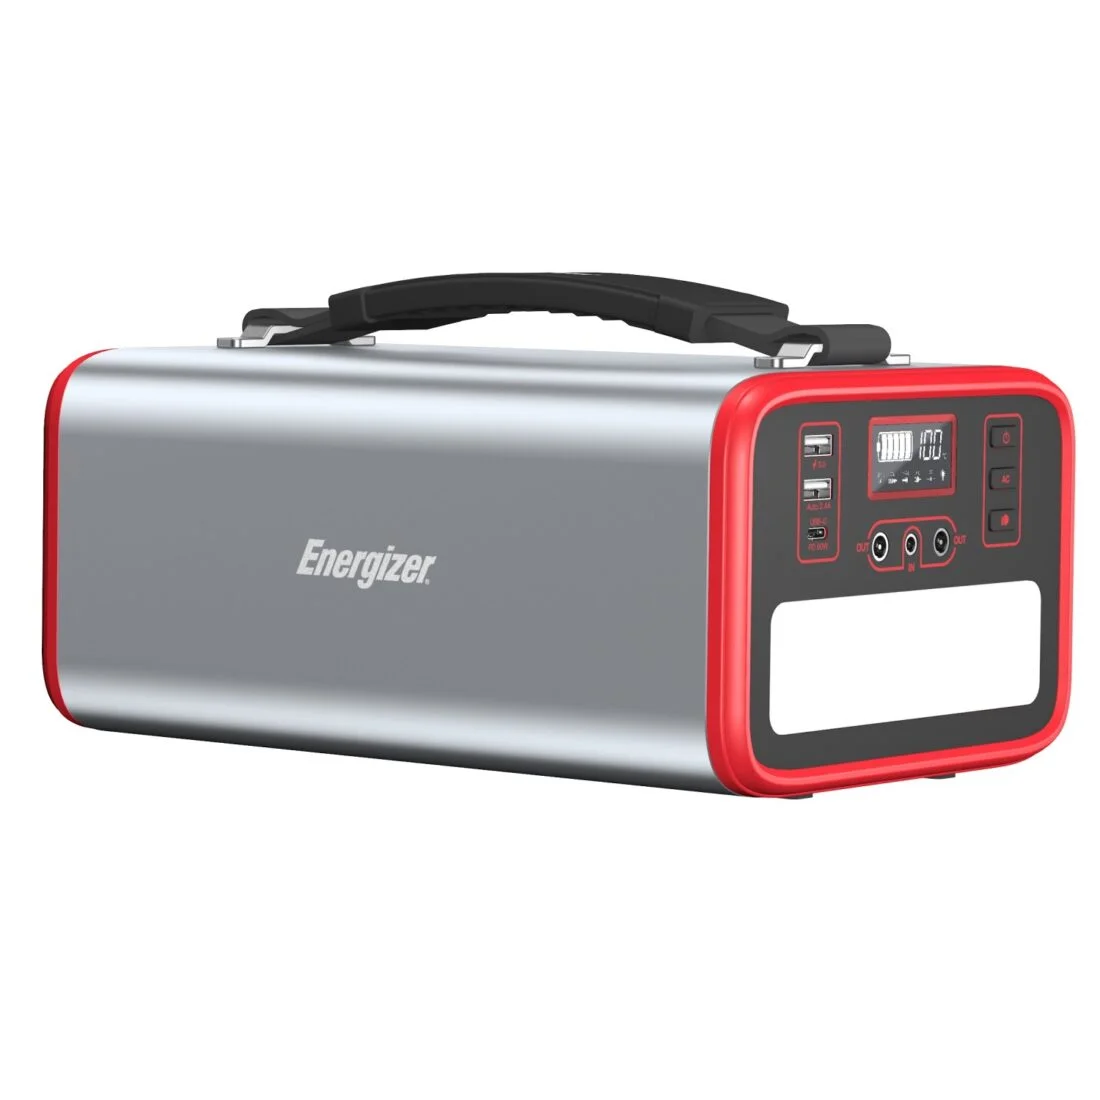 Energizer PPS320W1 Portable Power Station